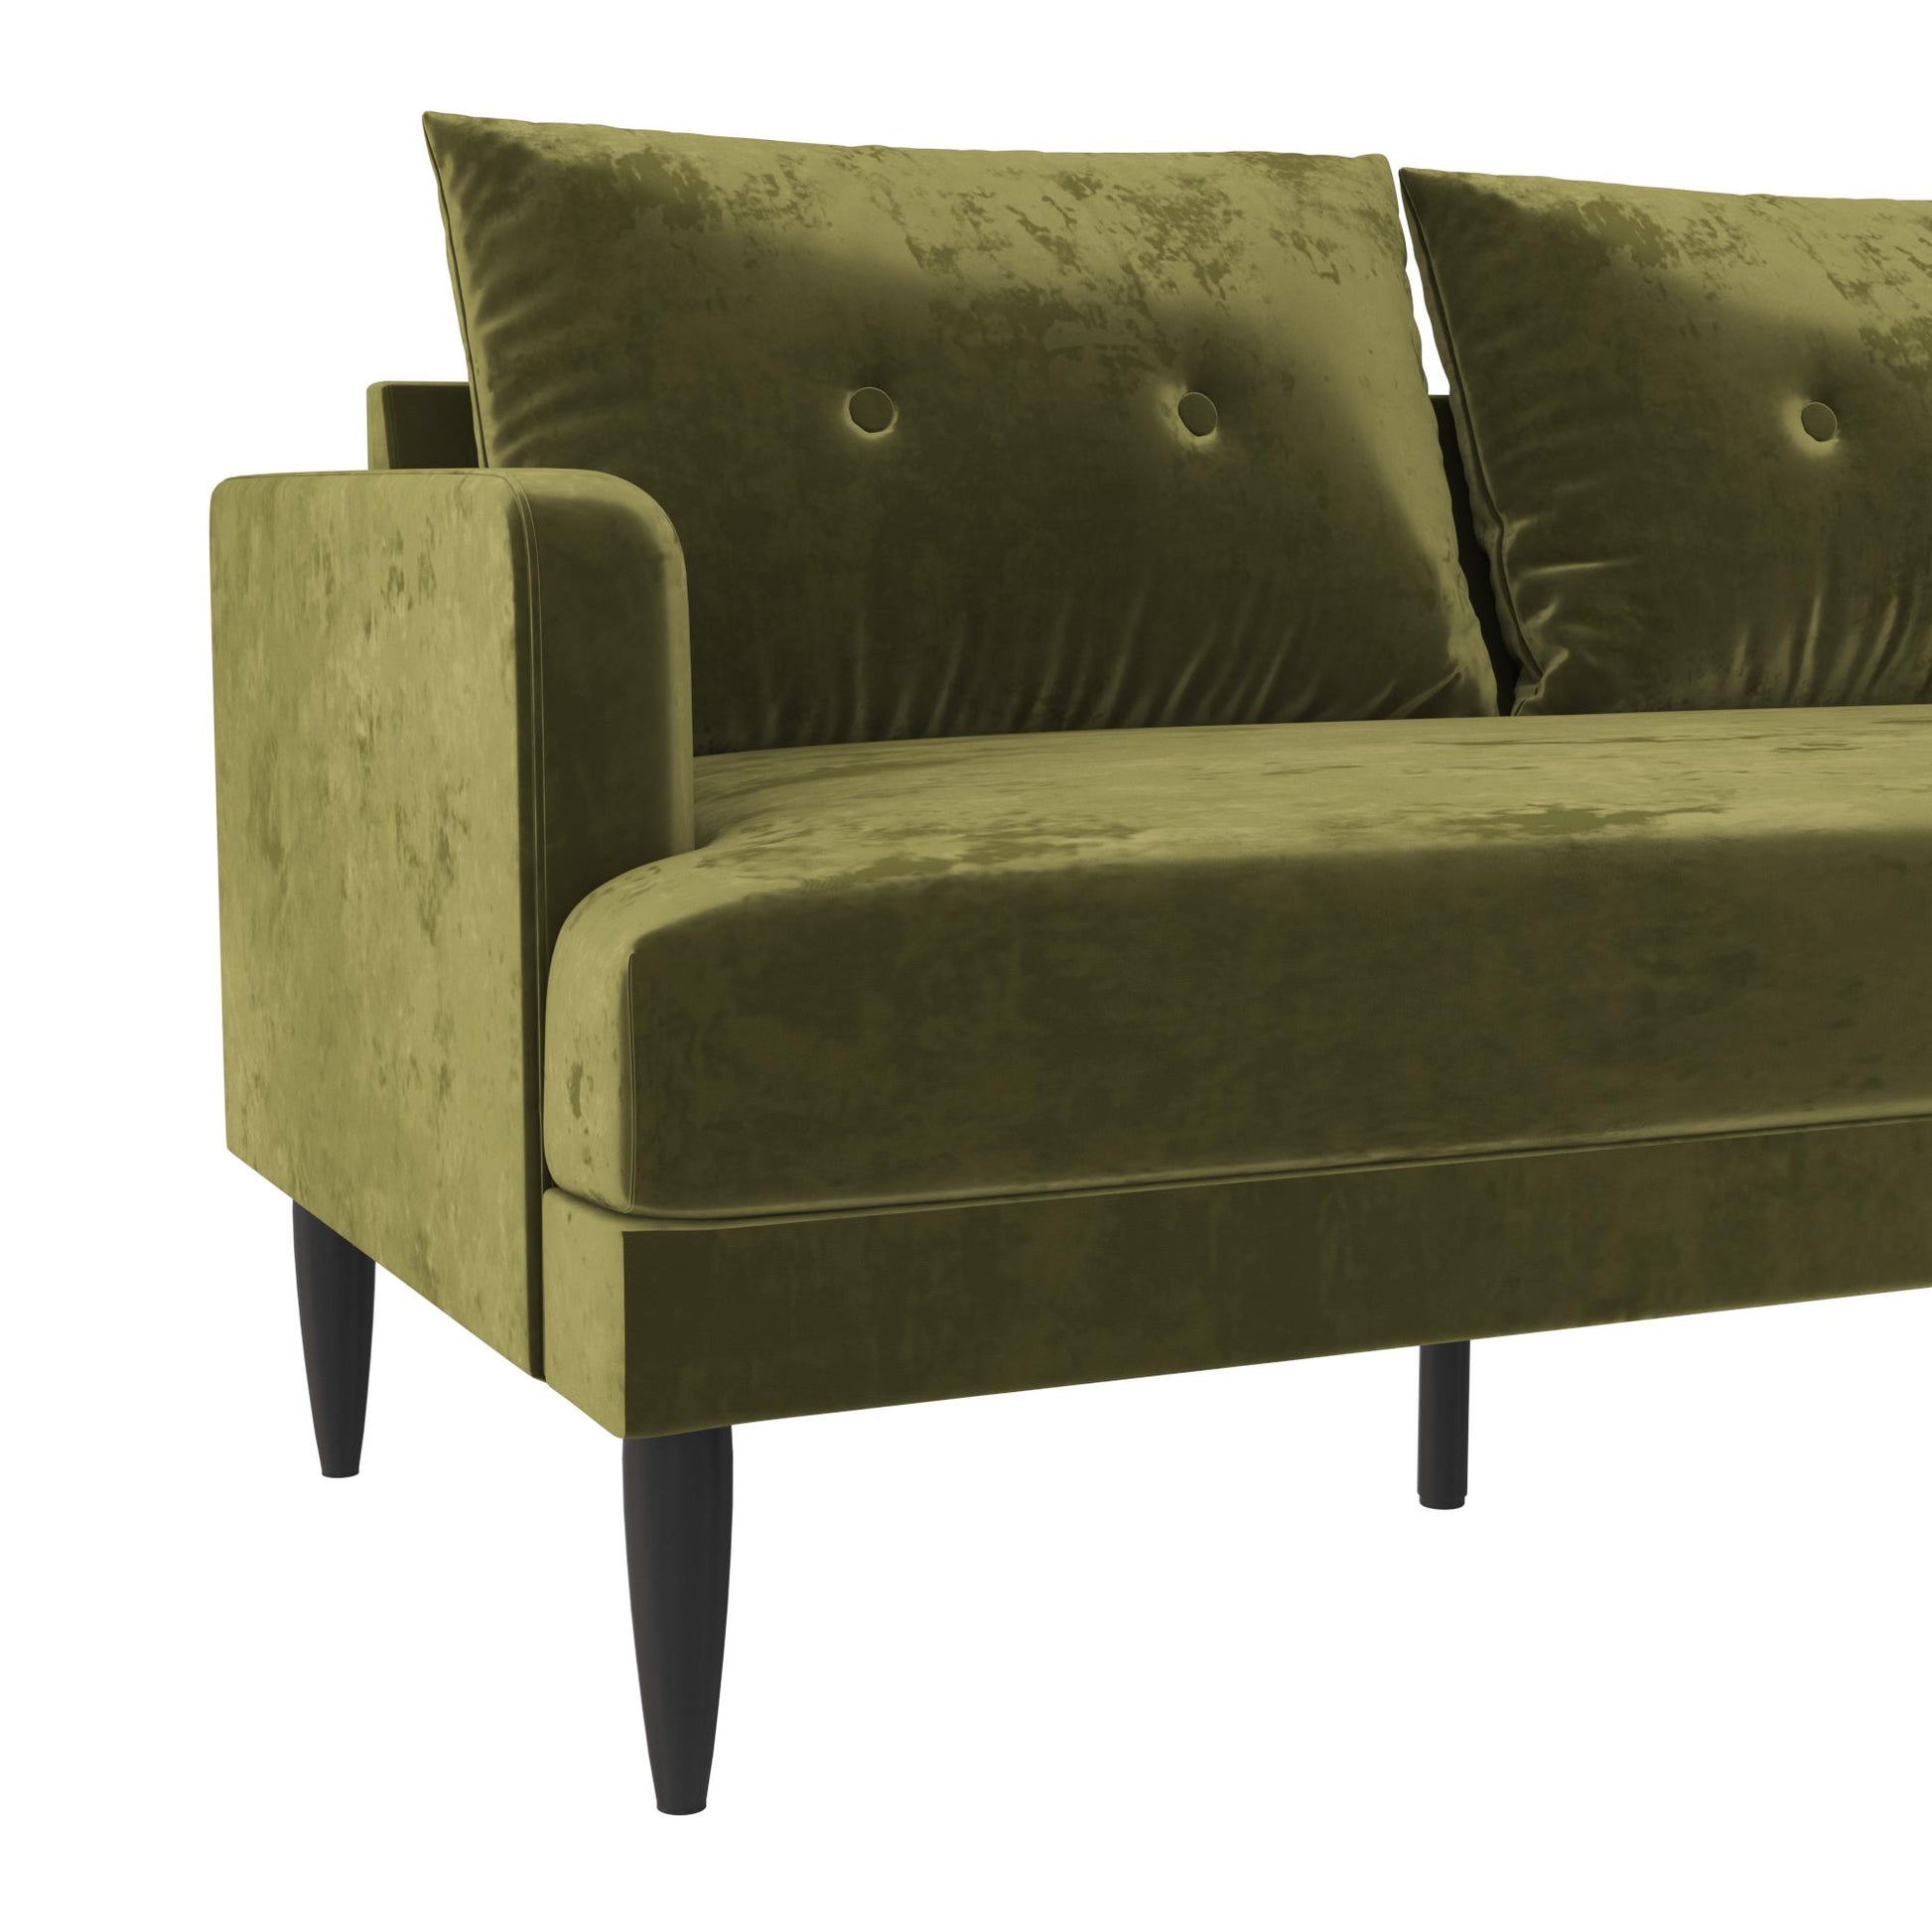 Bailey Pillowback Loveseat - Olive Green